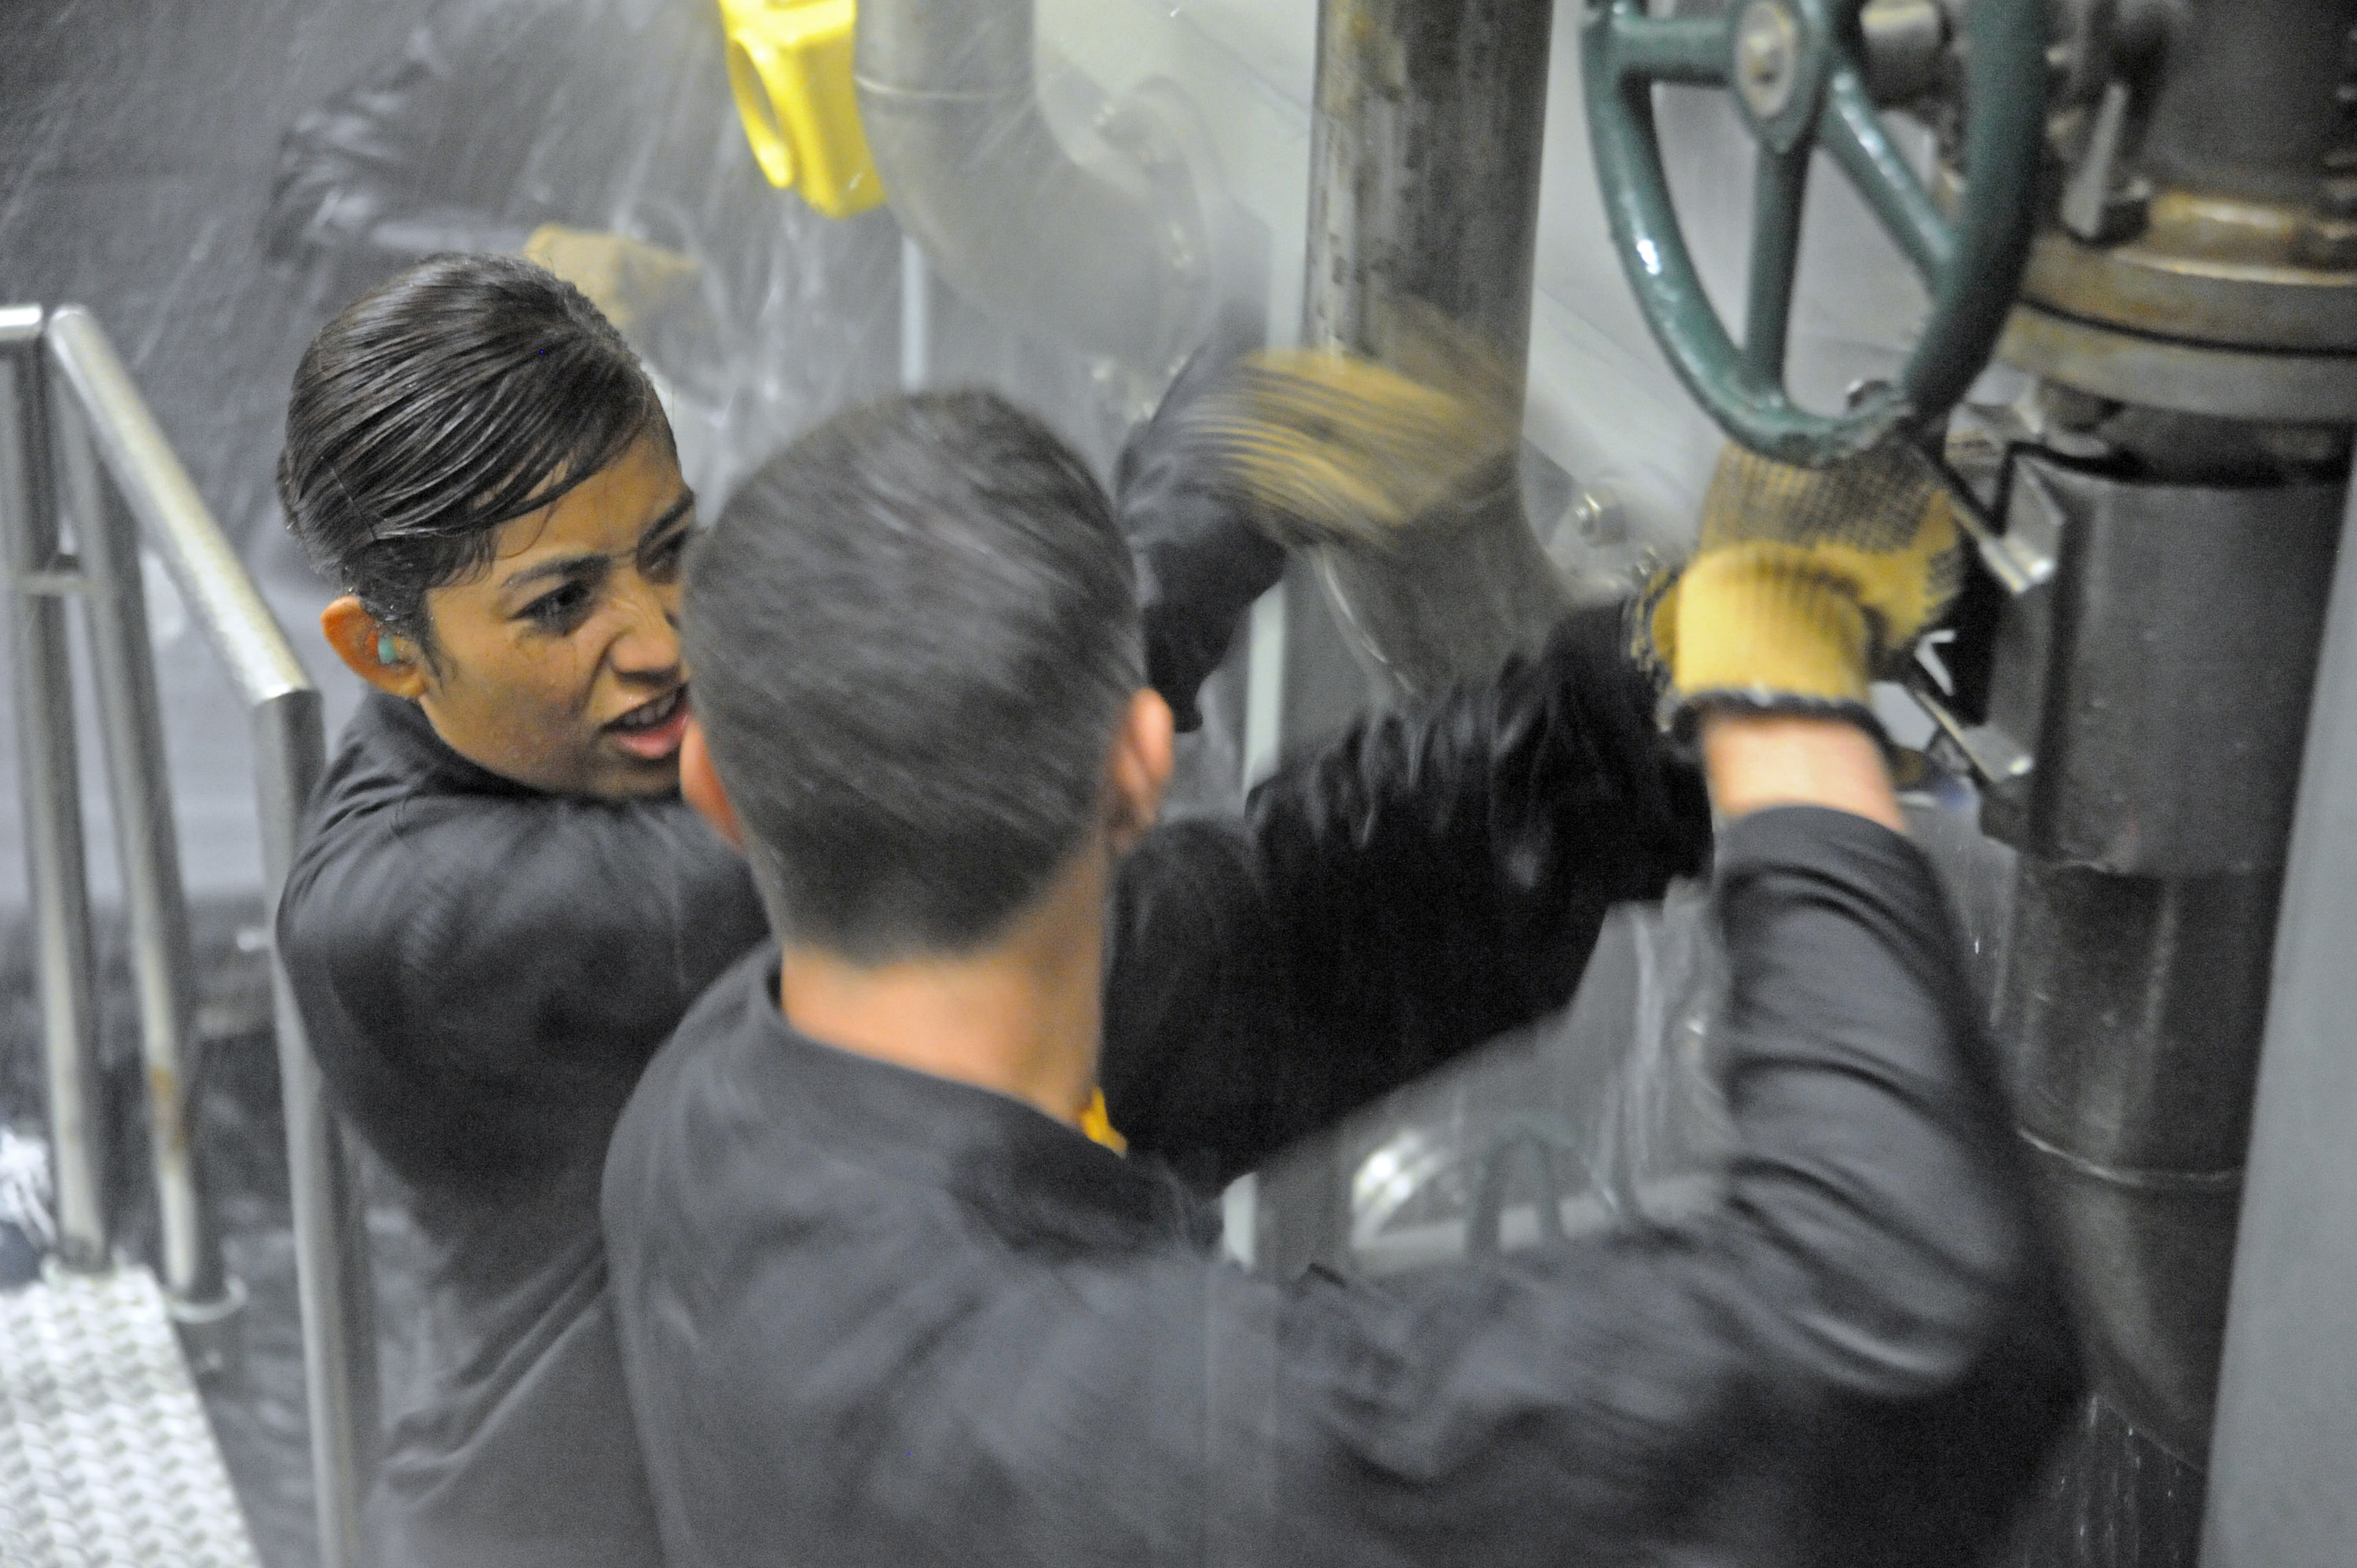 Midshipmen Janeth Jimenez and Dylan Brockin the damage control team wet trainer at Submarine Learning Center Detachment San Diego on June 6, 2013. US Navy Photo